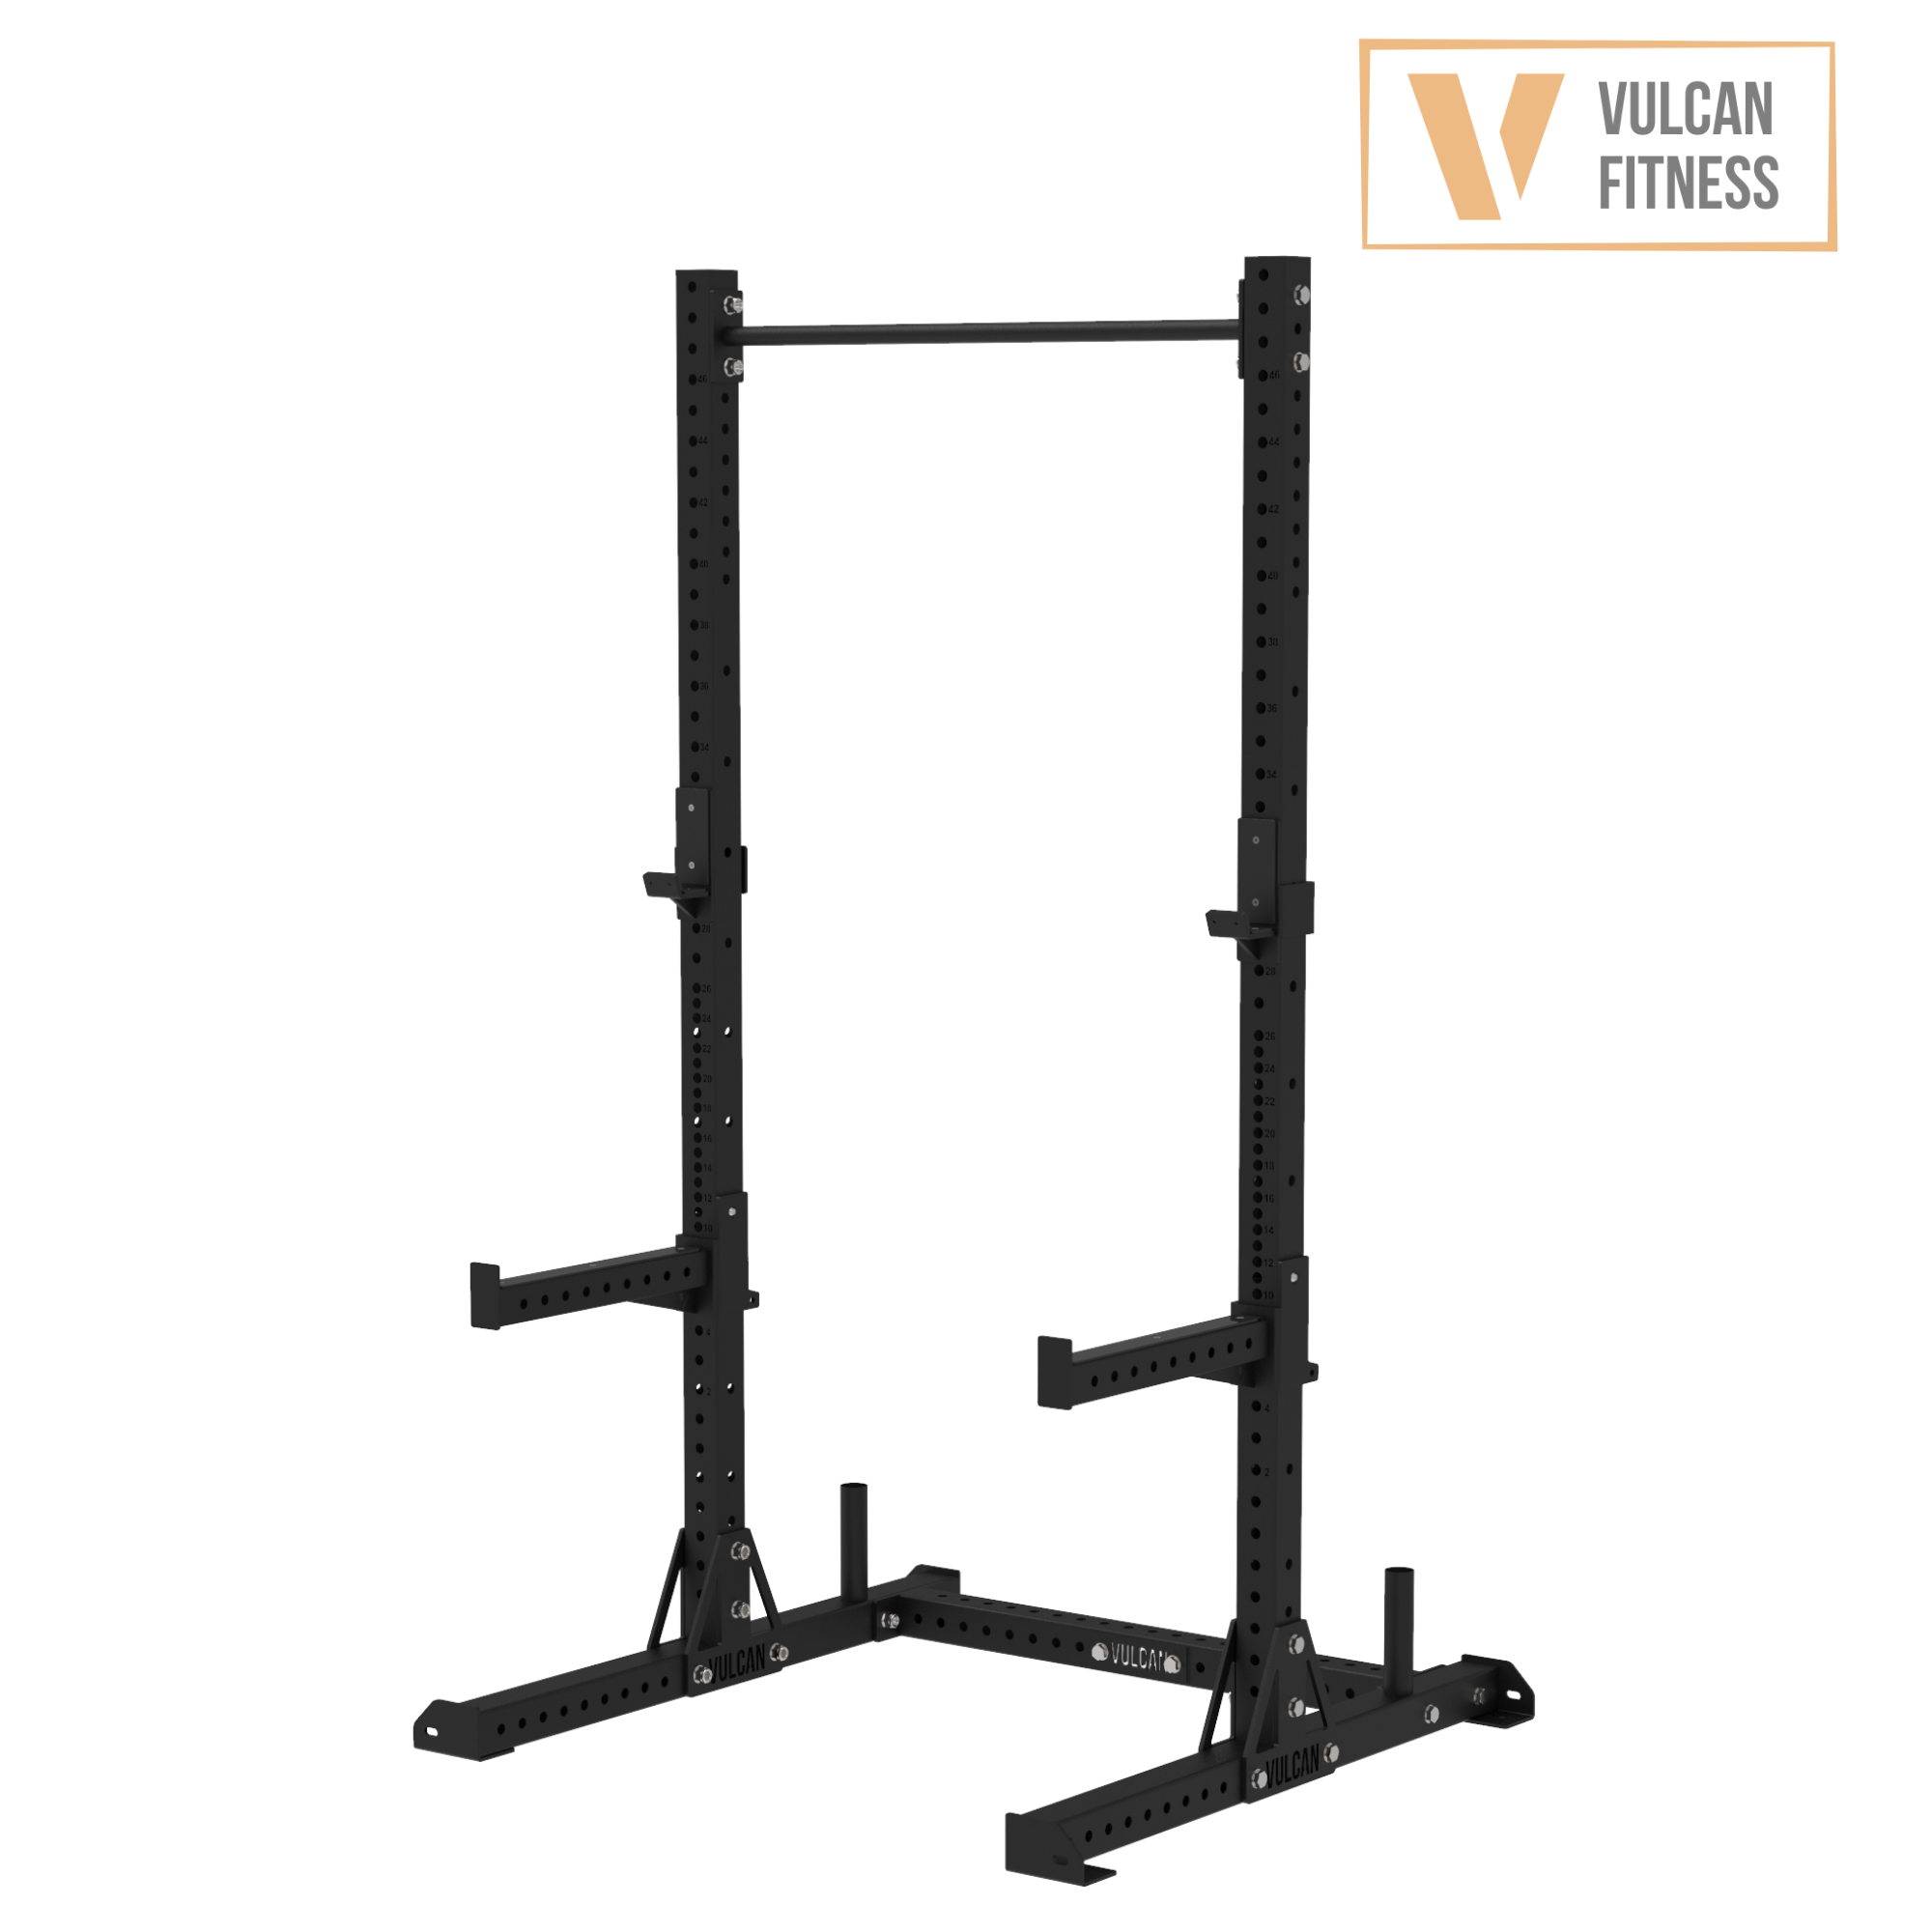 VULCAN Elite Squat Rack, Olympic Barbell, 150kg Colour Bumper Weight Plates & Adjustable Bench | IN STOCK